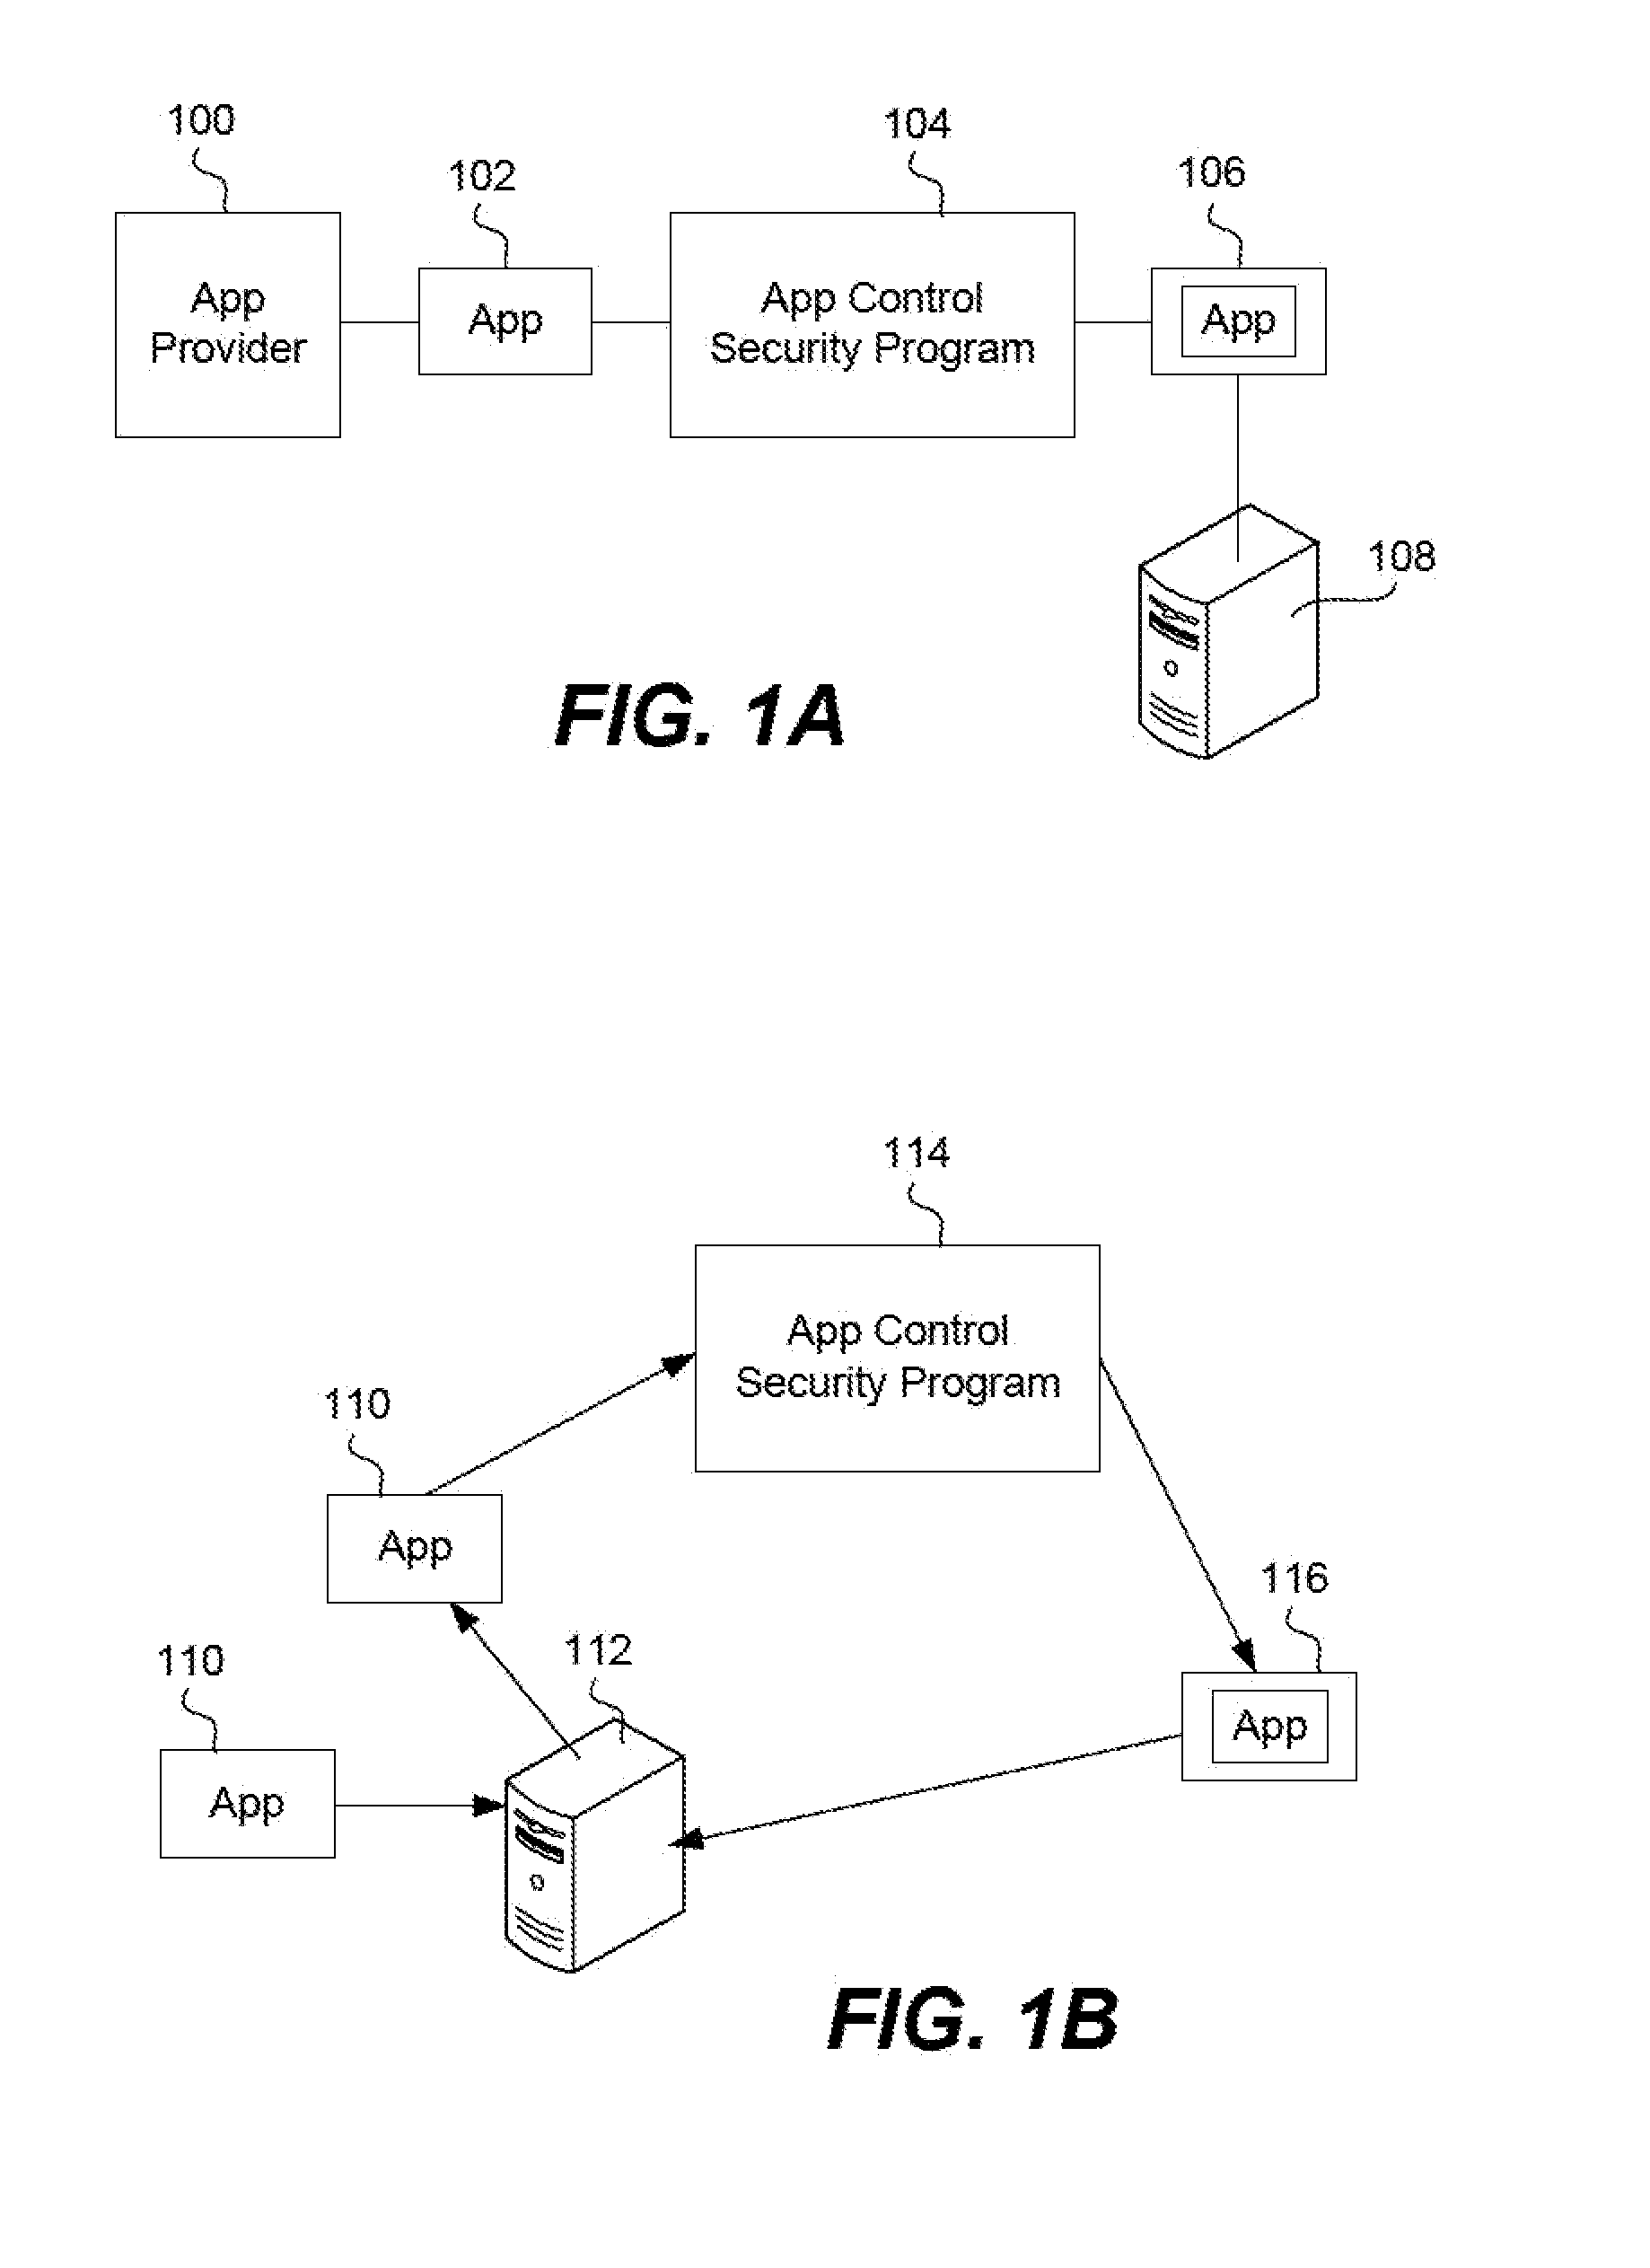 Network linker for secure execution of unsecured apps on a device